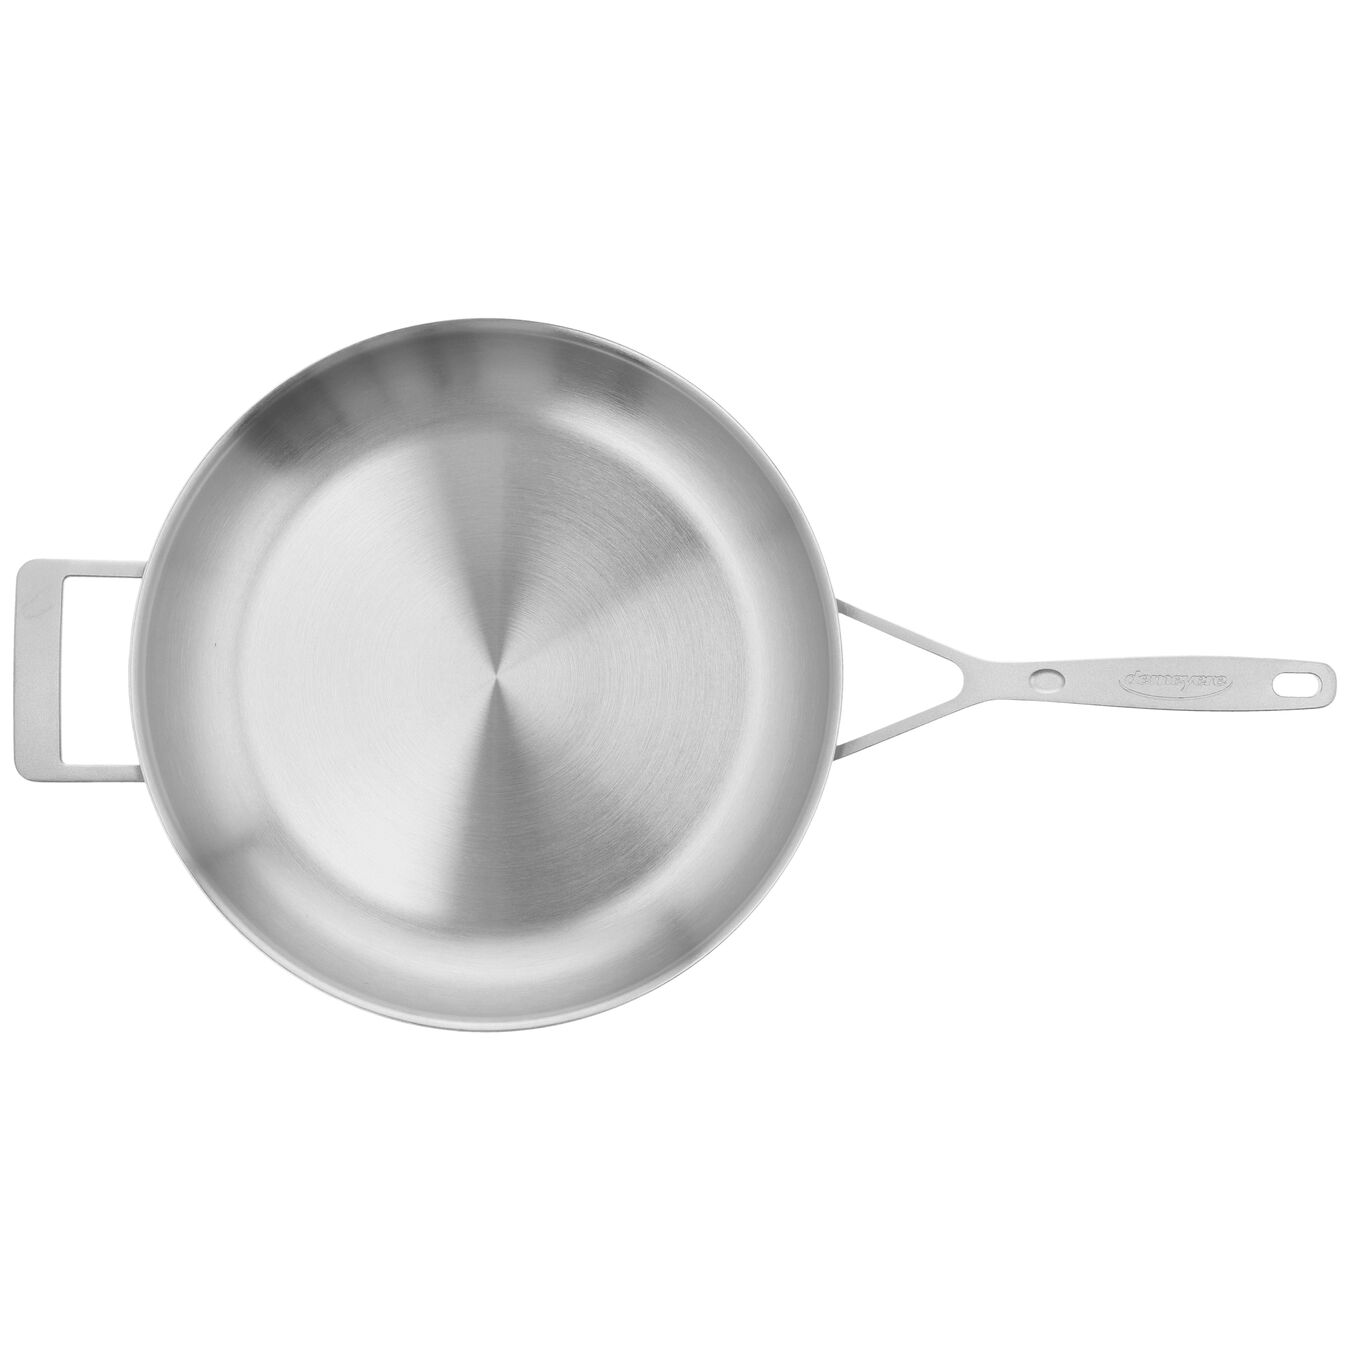 32 cm / 12.5 inch 18/10 Stainless Steel Frying pan,,large 2